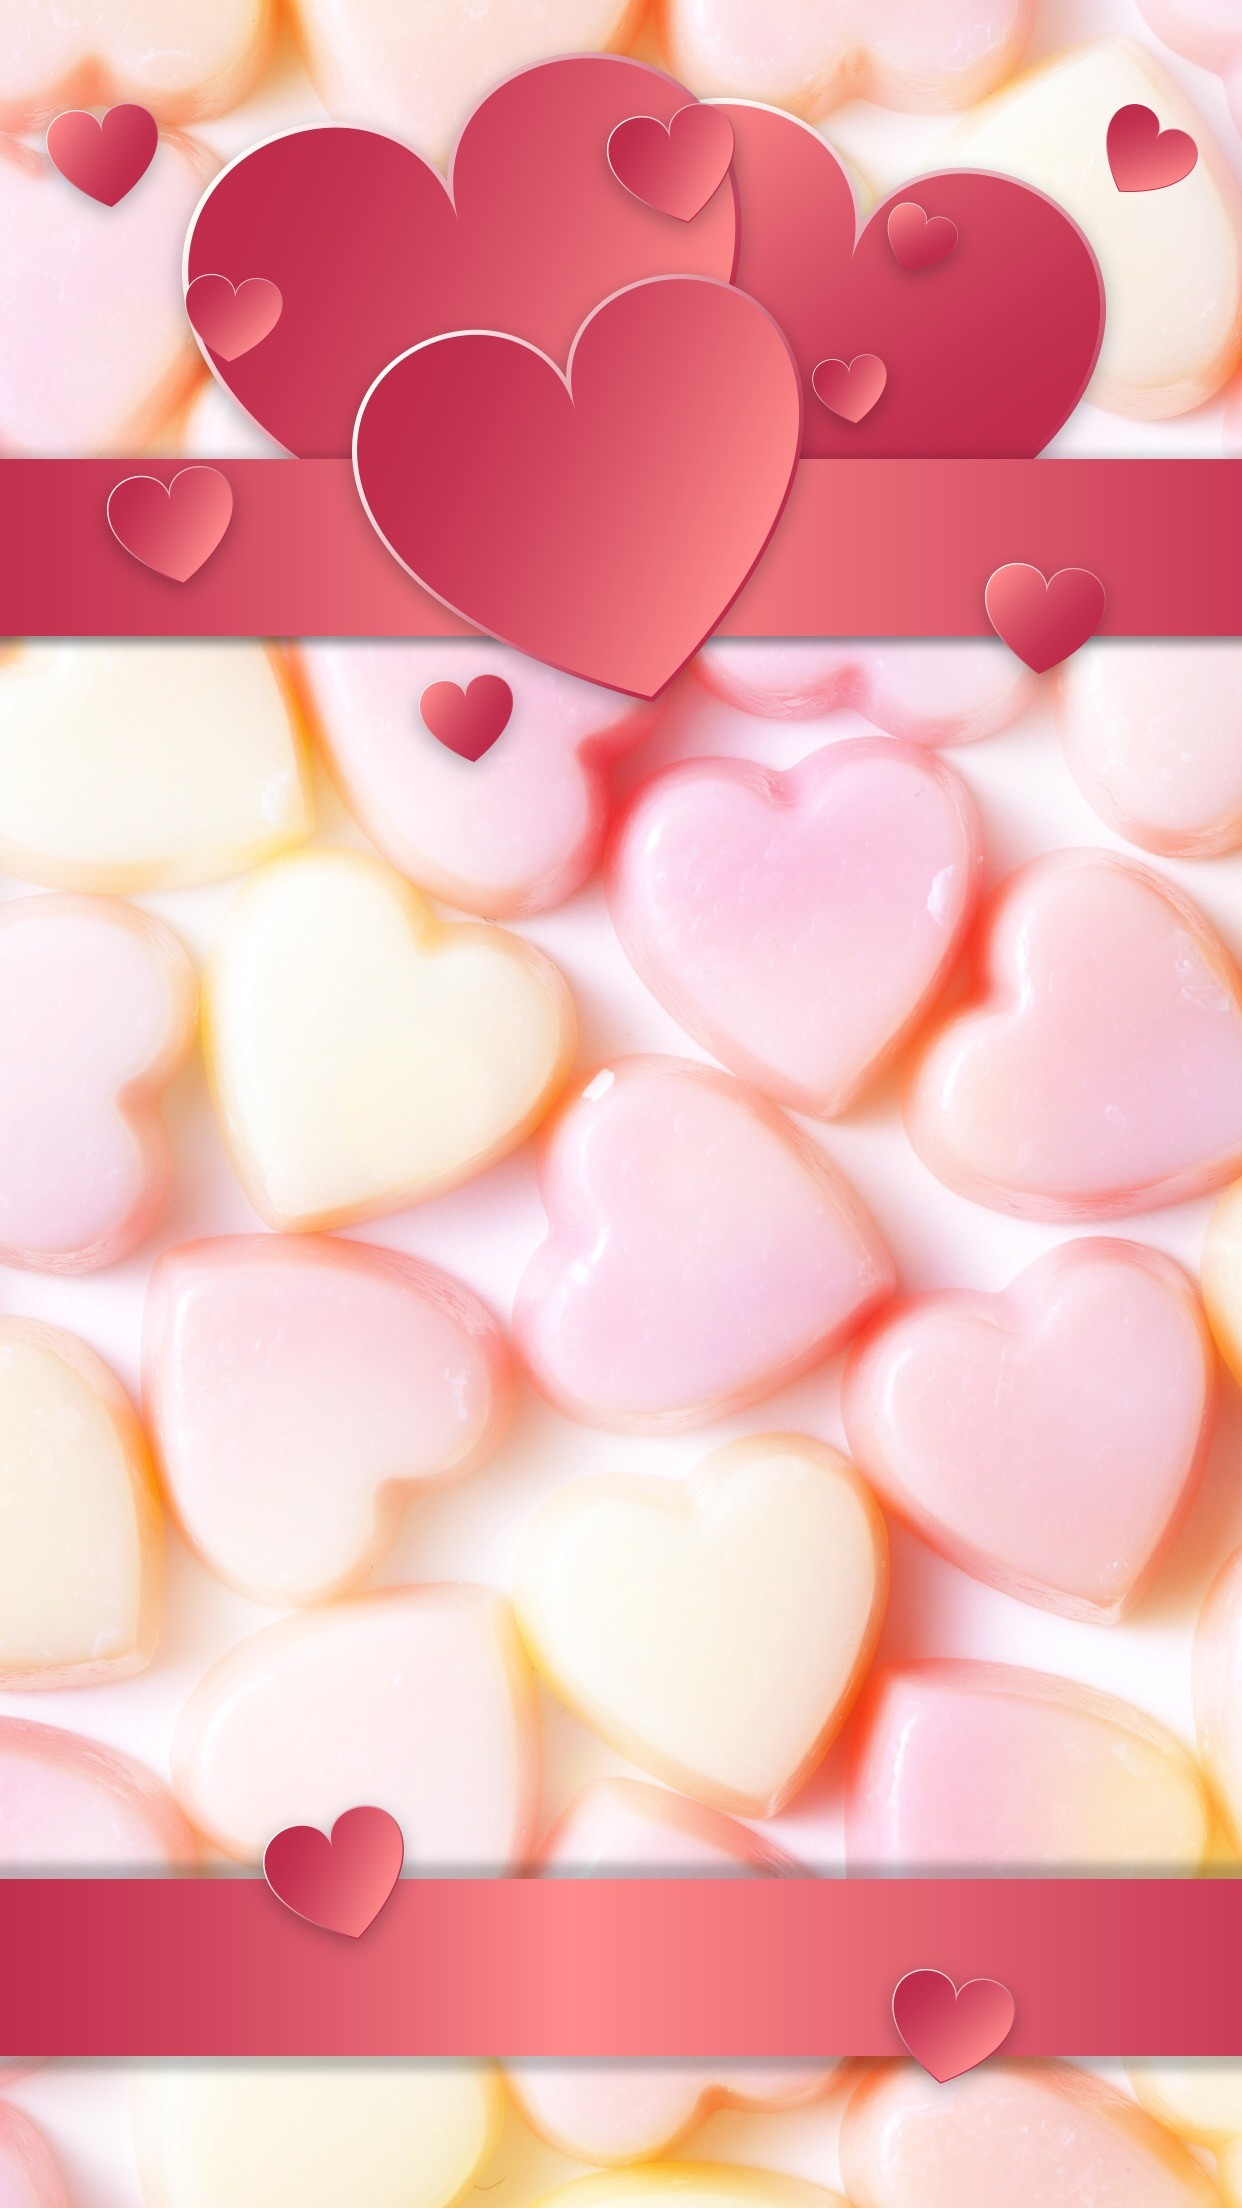 1242x2208 Iphone Backgrounds, Wallpaper Backgrounds, Wallpapers, Sweet Hearts,  Marketing Ideas, Valentines, Pictures, Funds